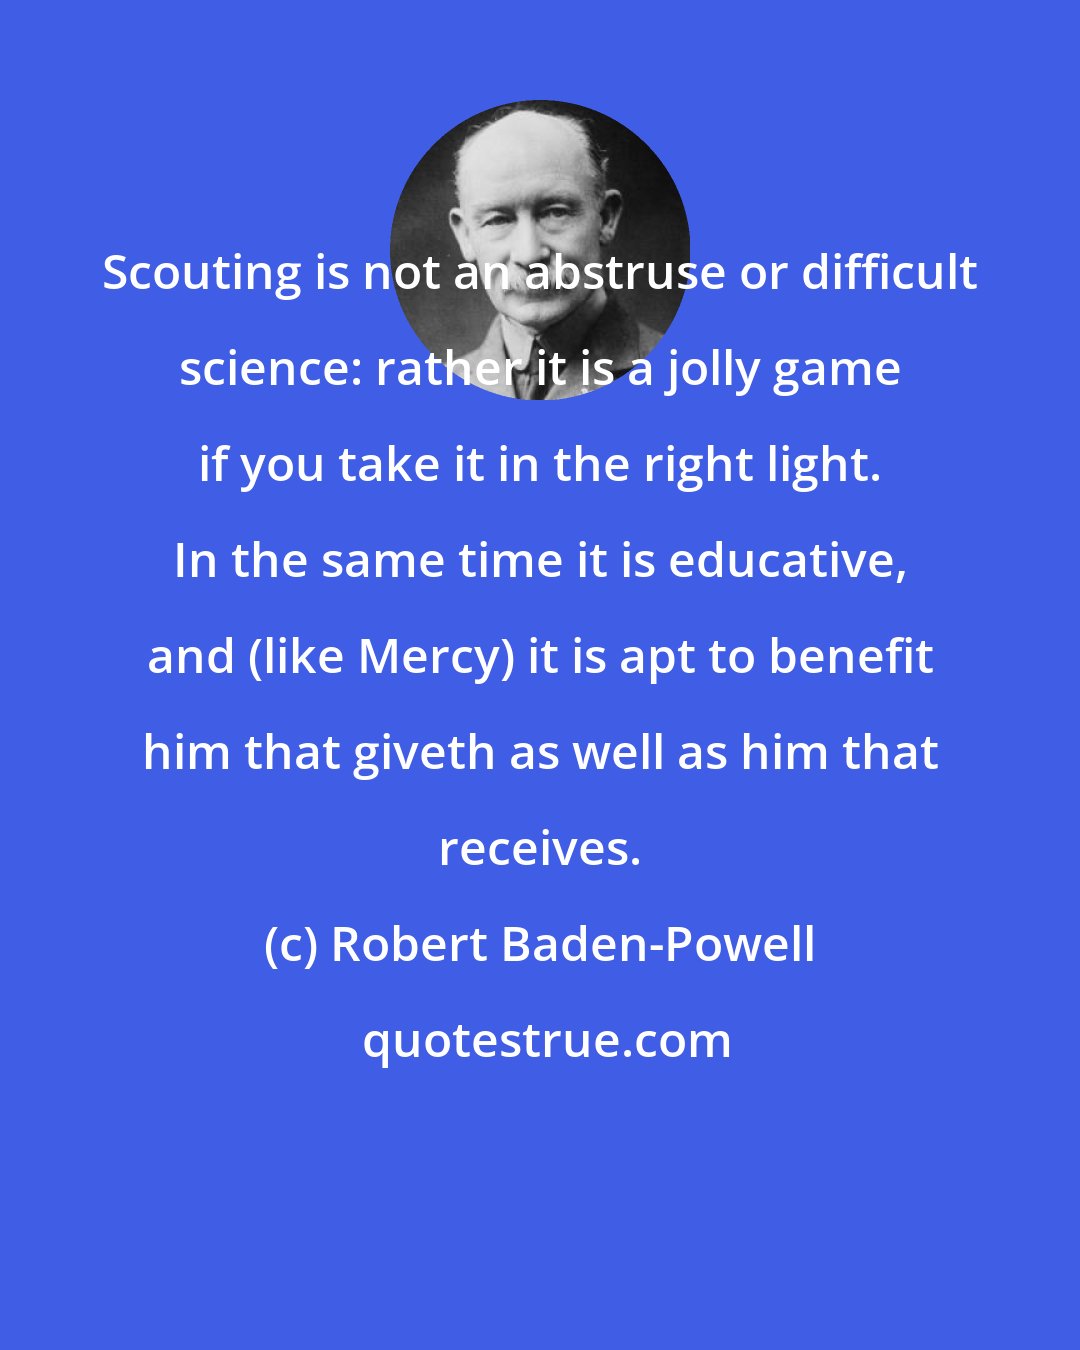 Robert Baden-Powell: Scouting is not an abstruse or difficult science: rather it is a jolly game if you take it in the right light. In the same time it is educative, and (like Mercy) it is apt to benefit him that giveth as well as him that receives.